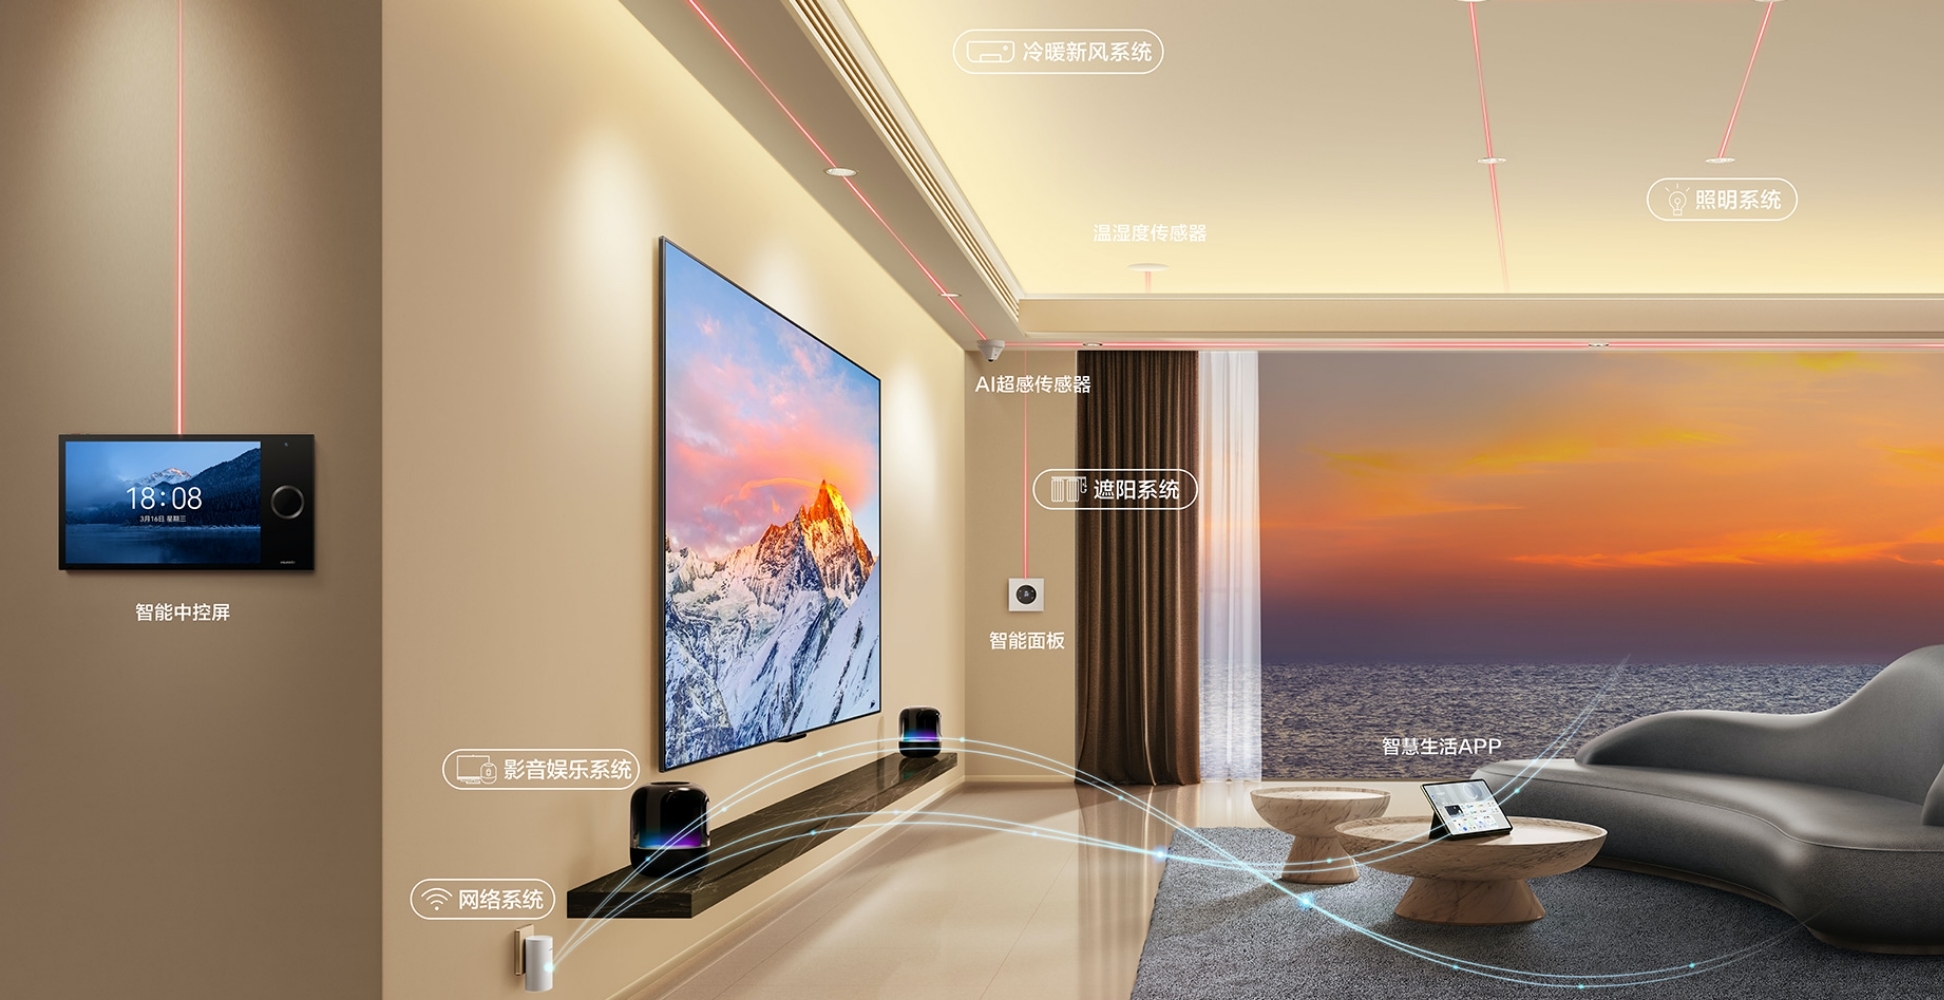 huawei-whole-home-pre-installed-solution@2x.jpg